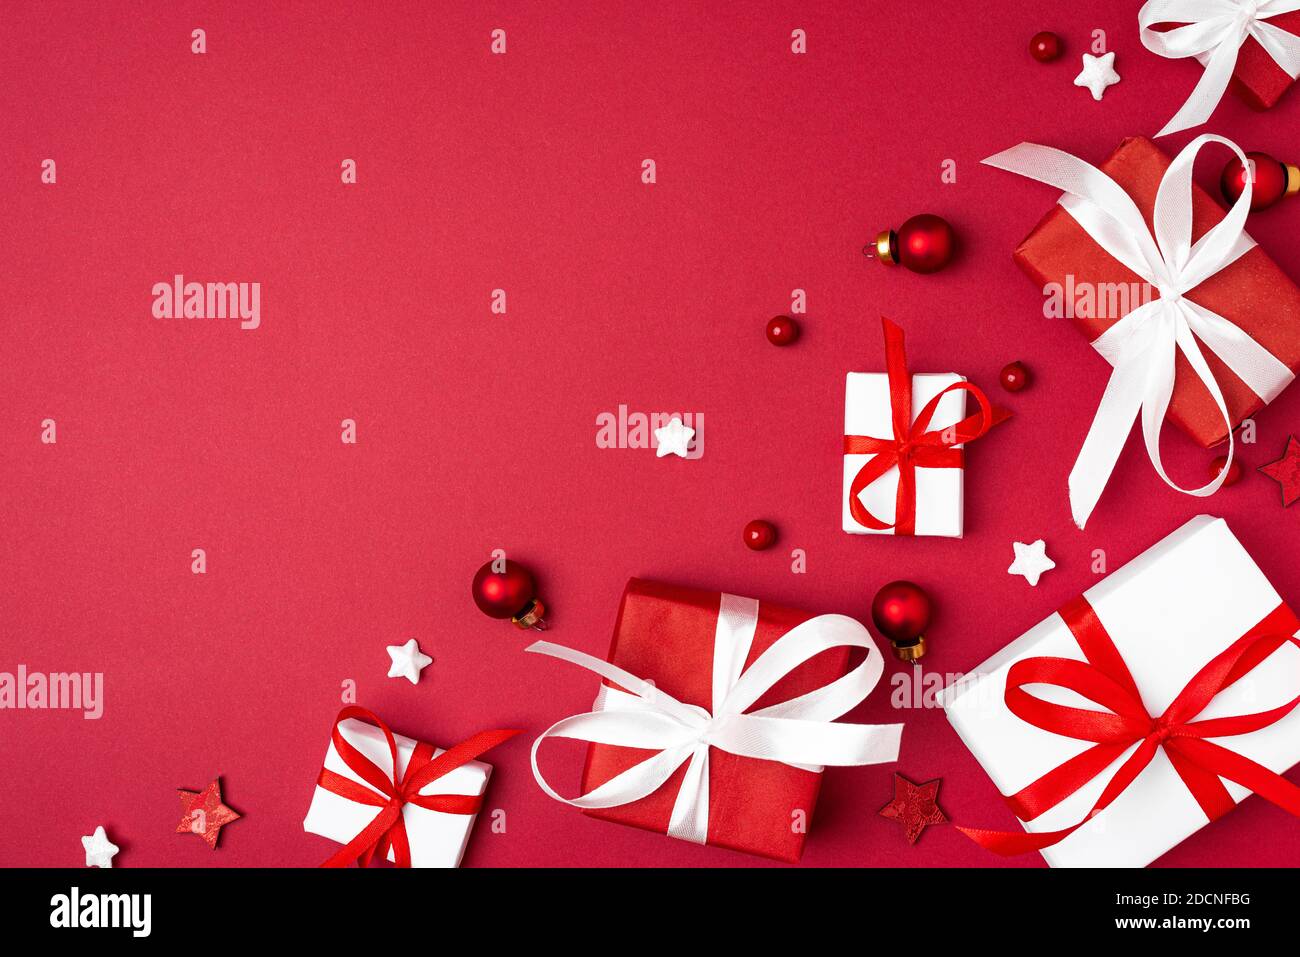 Merry Christmas and Happy New Year greeting card. Red and white Christmas gift boxes on red background. top view. Winter xmas holiday concept. Flat la Stock Photo